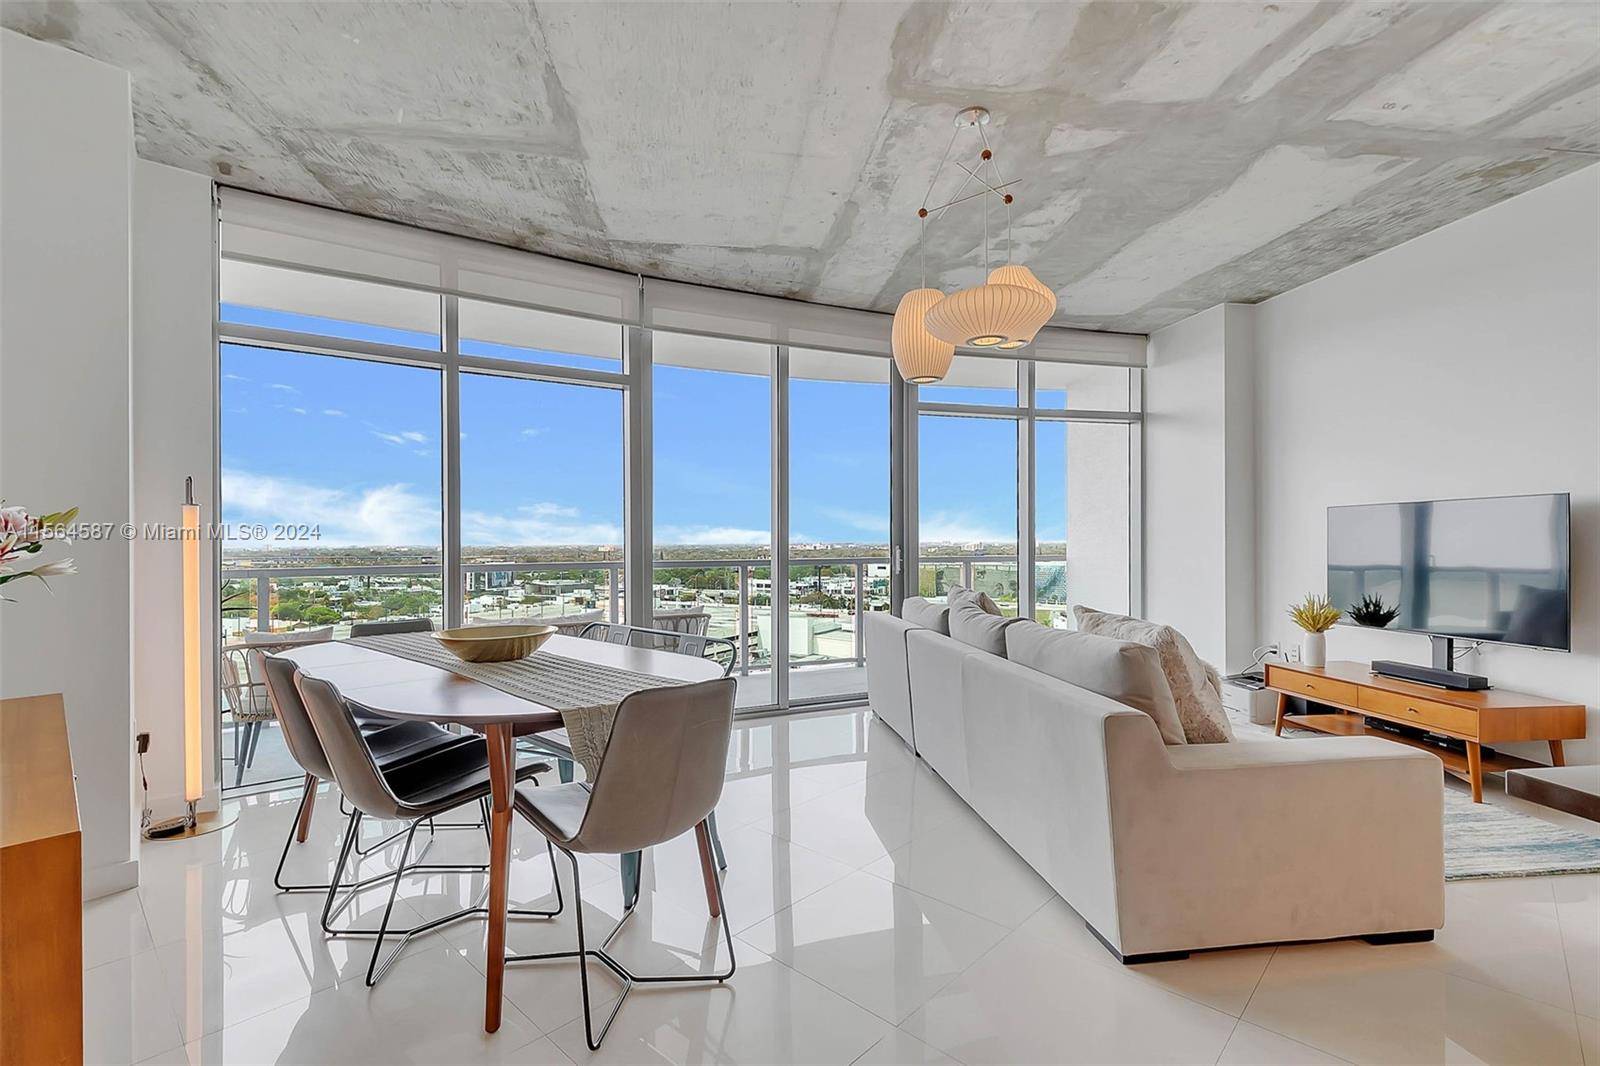 Experience Luxury Living in this Stunning 2 bed 2 bath Residence with Resort style Amenities in the Heart of Trendy Midtown.